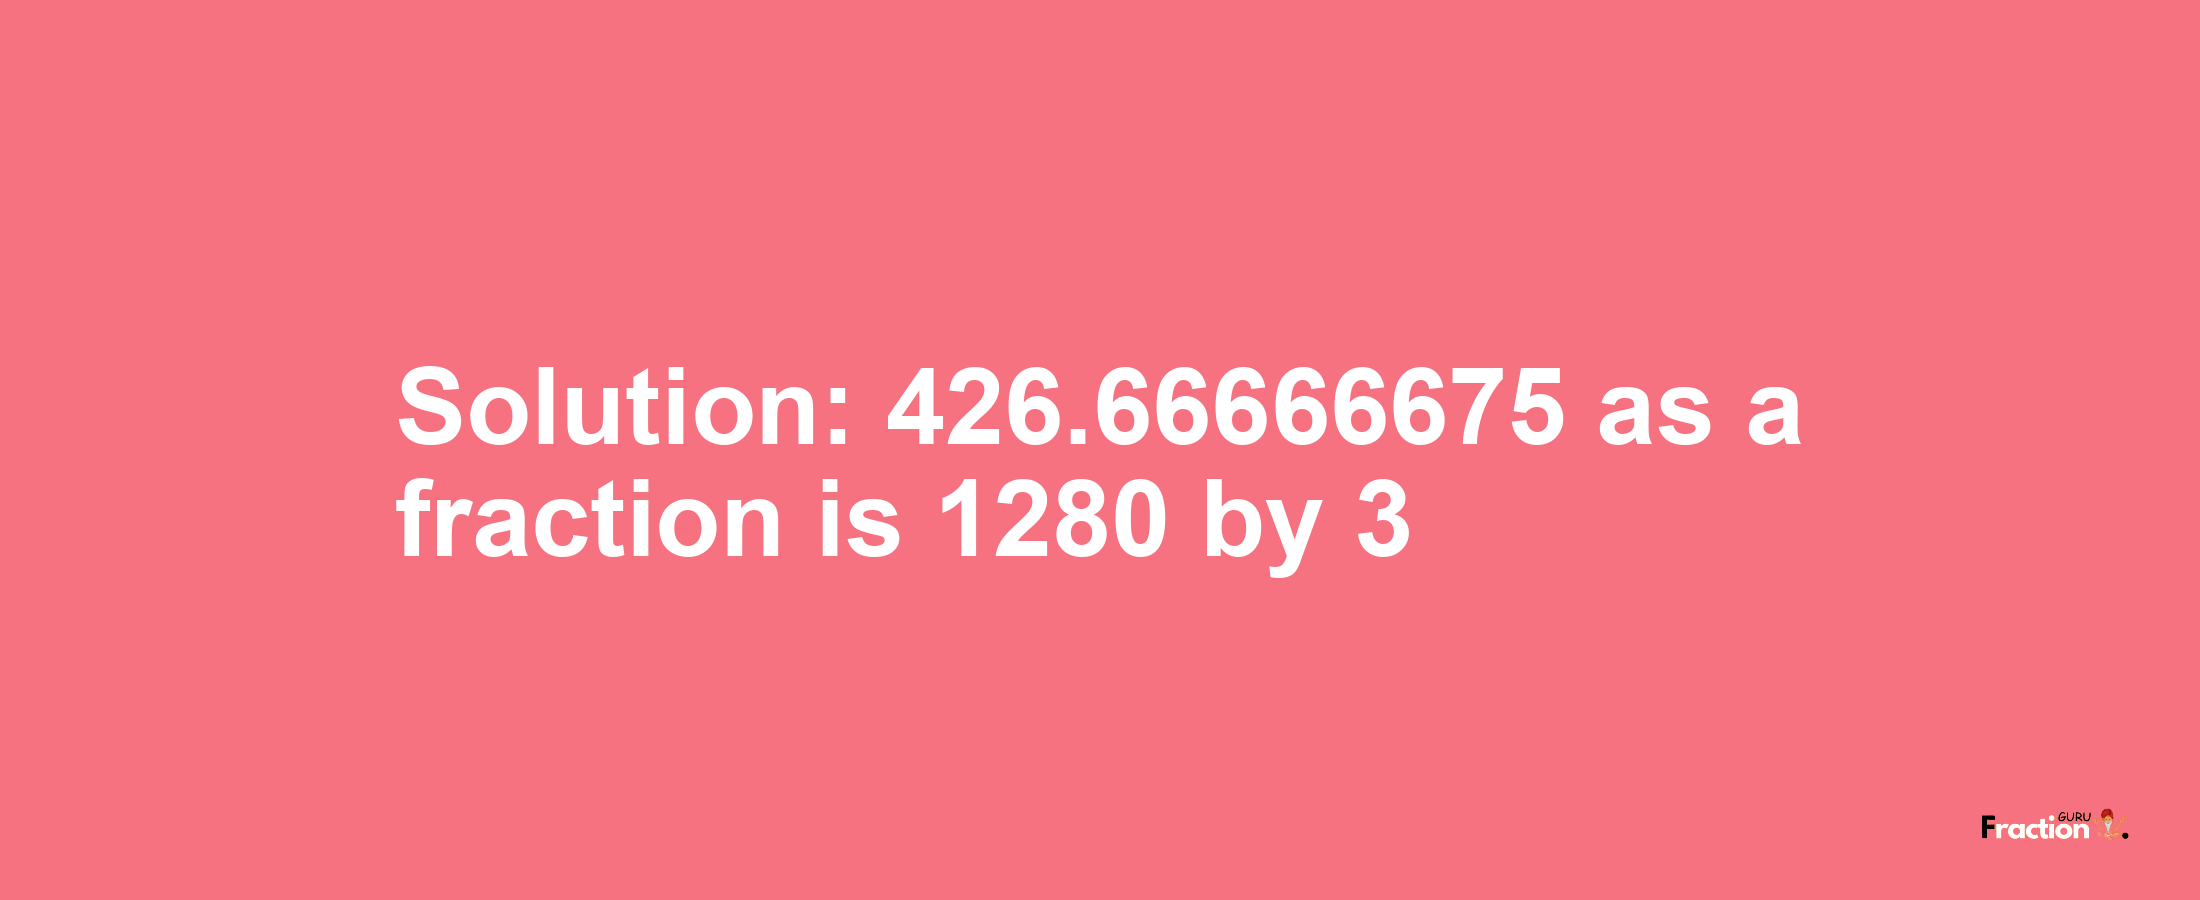 Solution:426.66666675 as a fraction is 1280/3